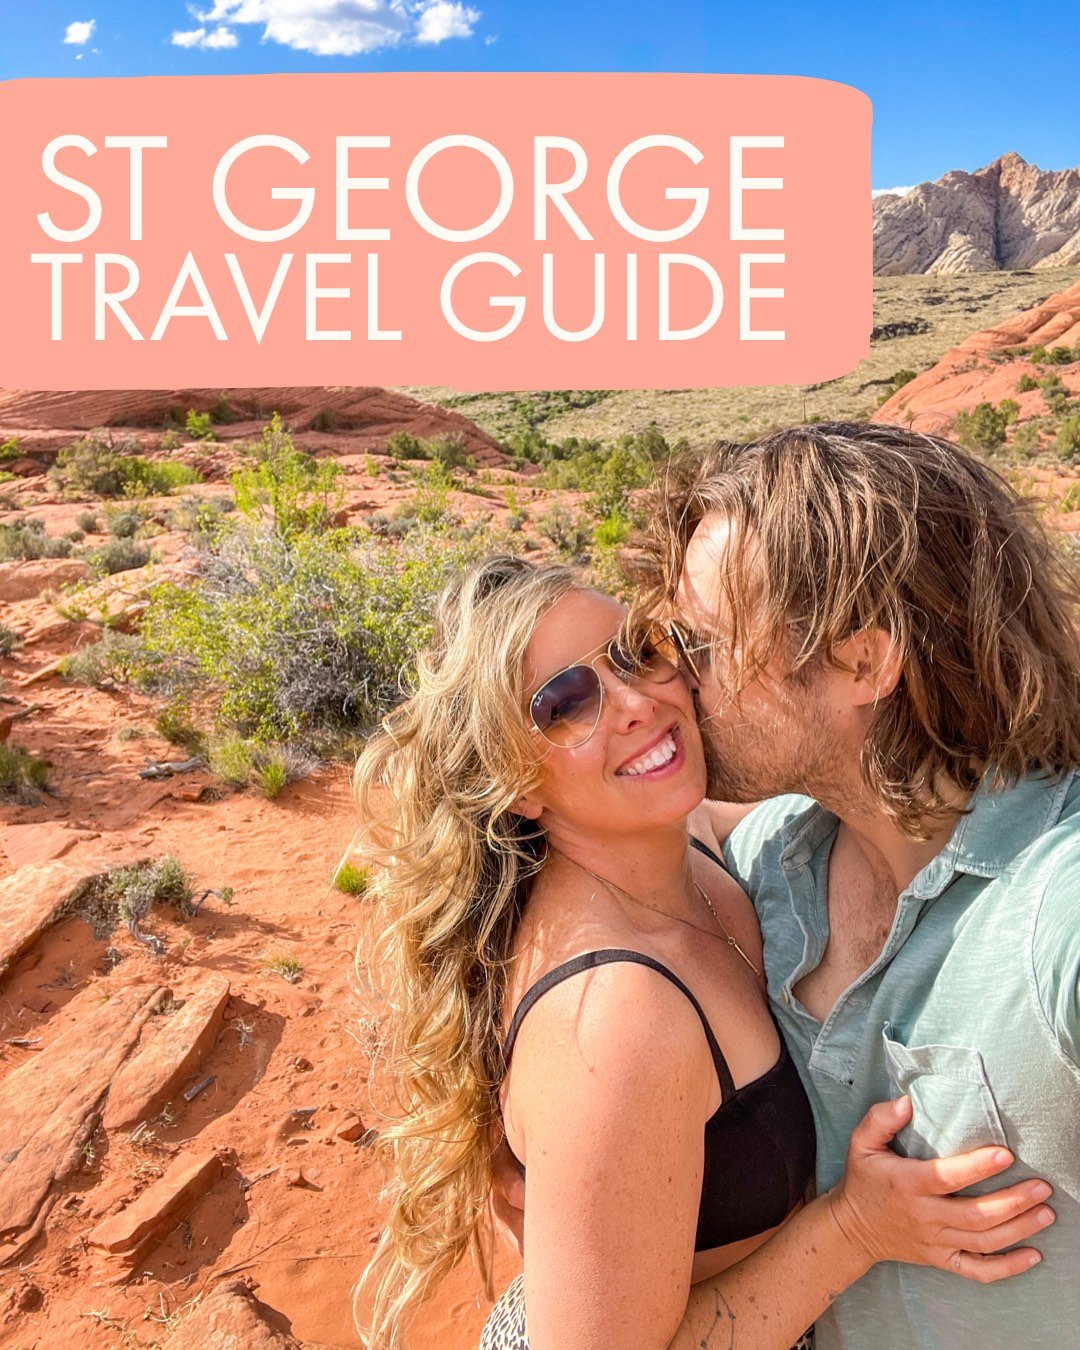 Liz Moody’s St. George Travel Guide (Healthy Restaurants, Hikes, And More)